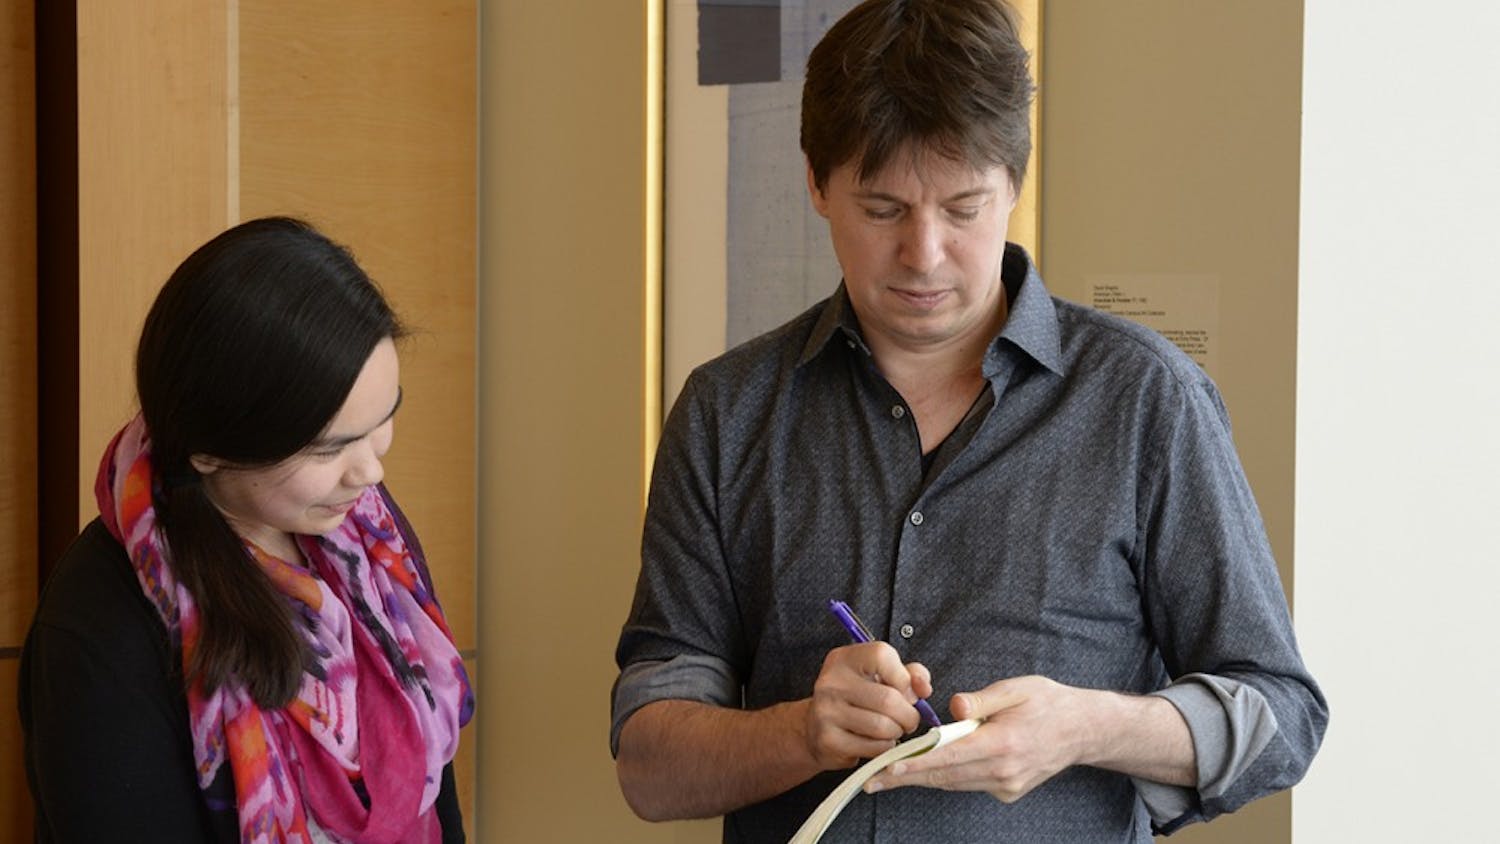 Violinist Joshua Bell signs autographs with students after a round-table discussion. The discussion was open only to Jacobs students, who were able to eat lunch and ask the musician questions.